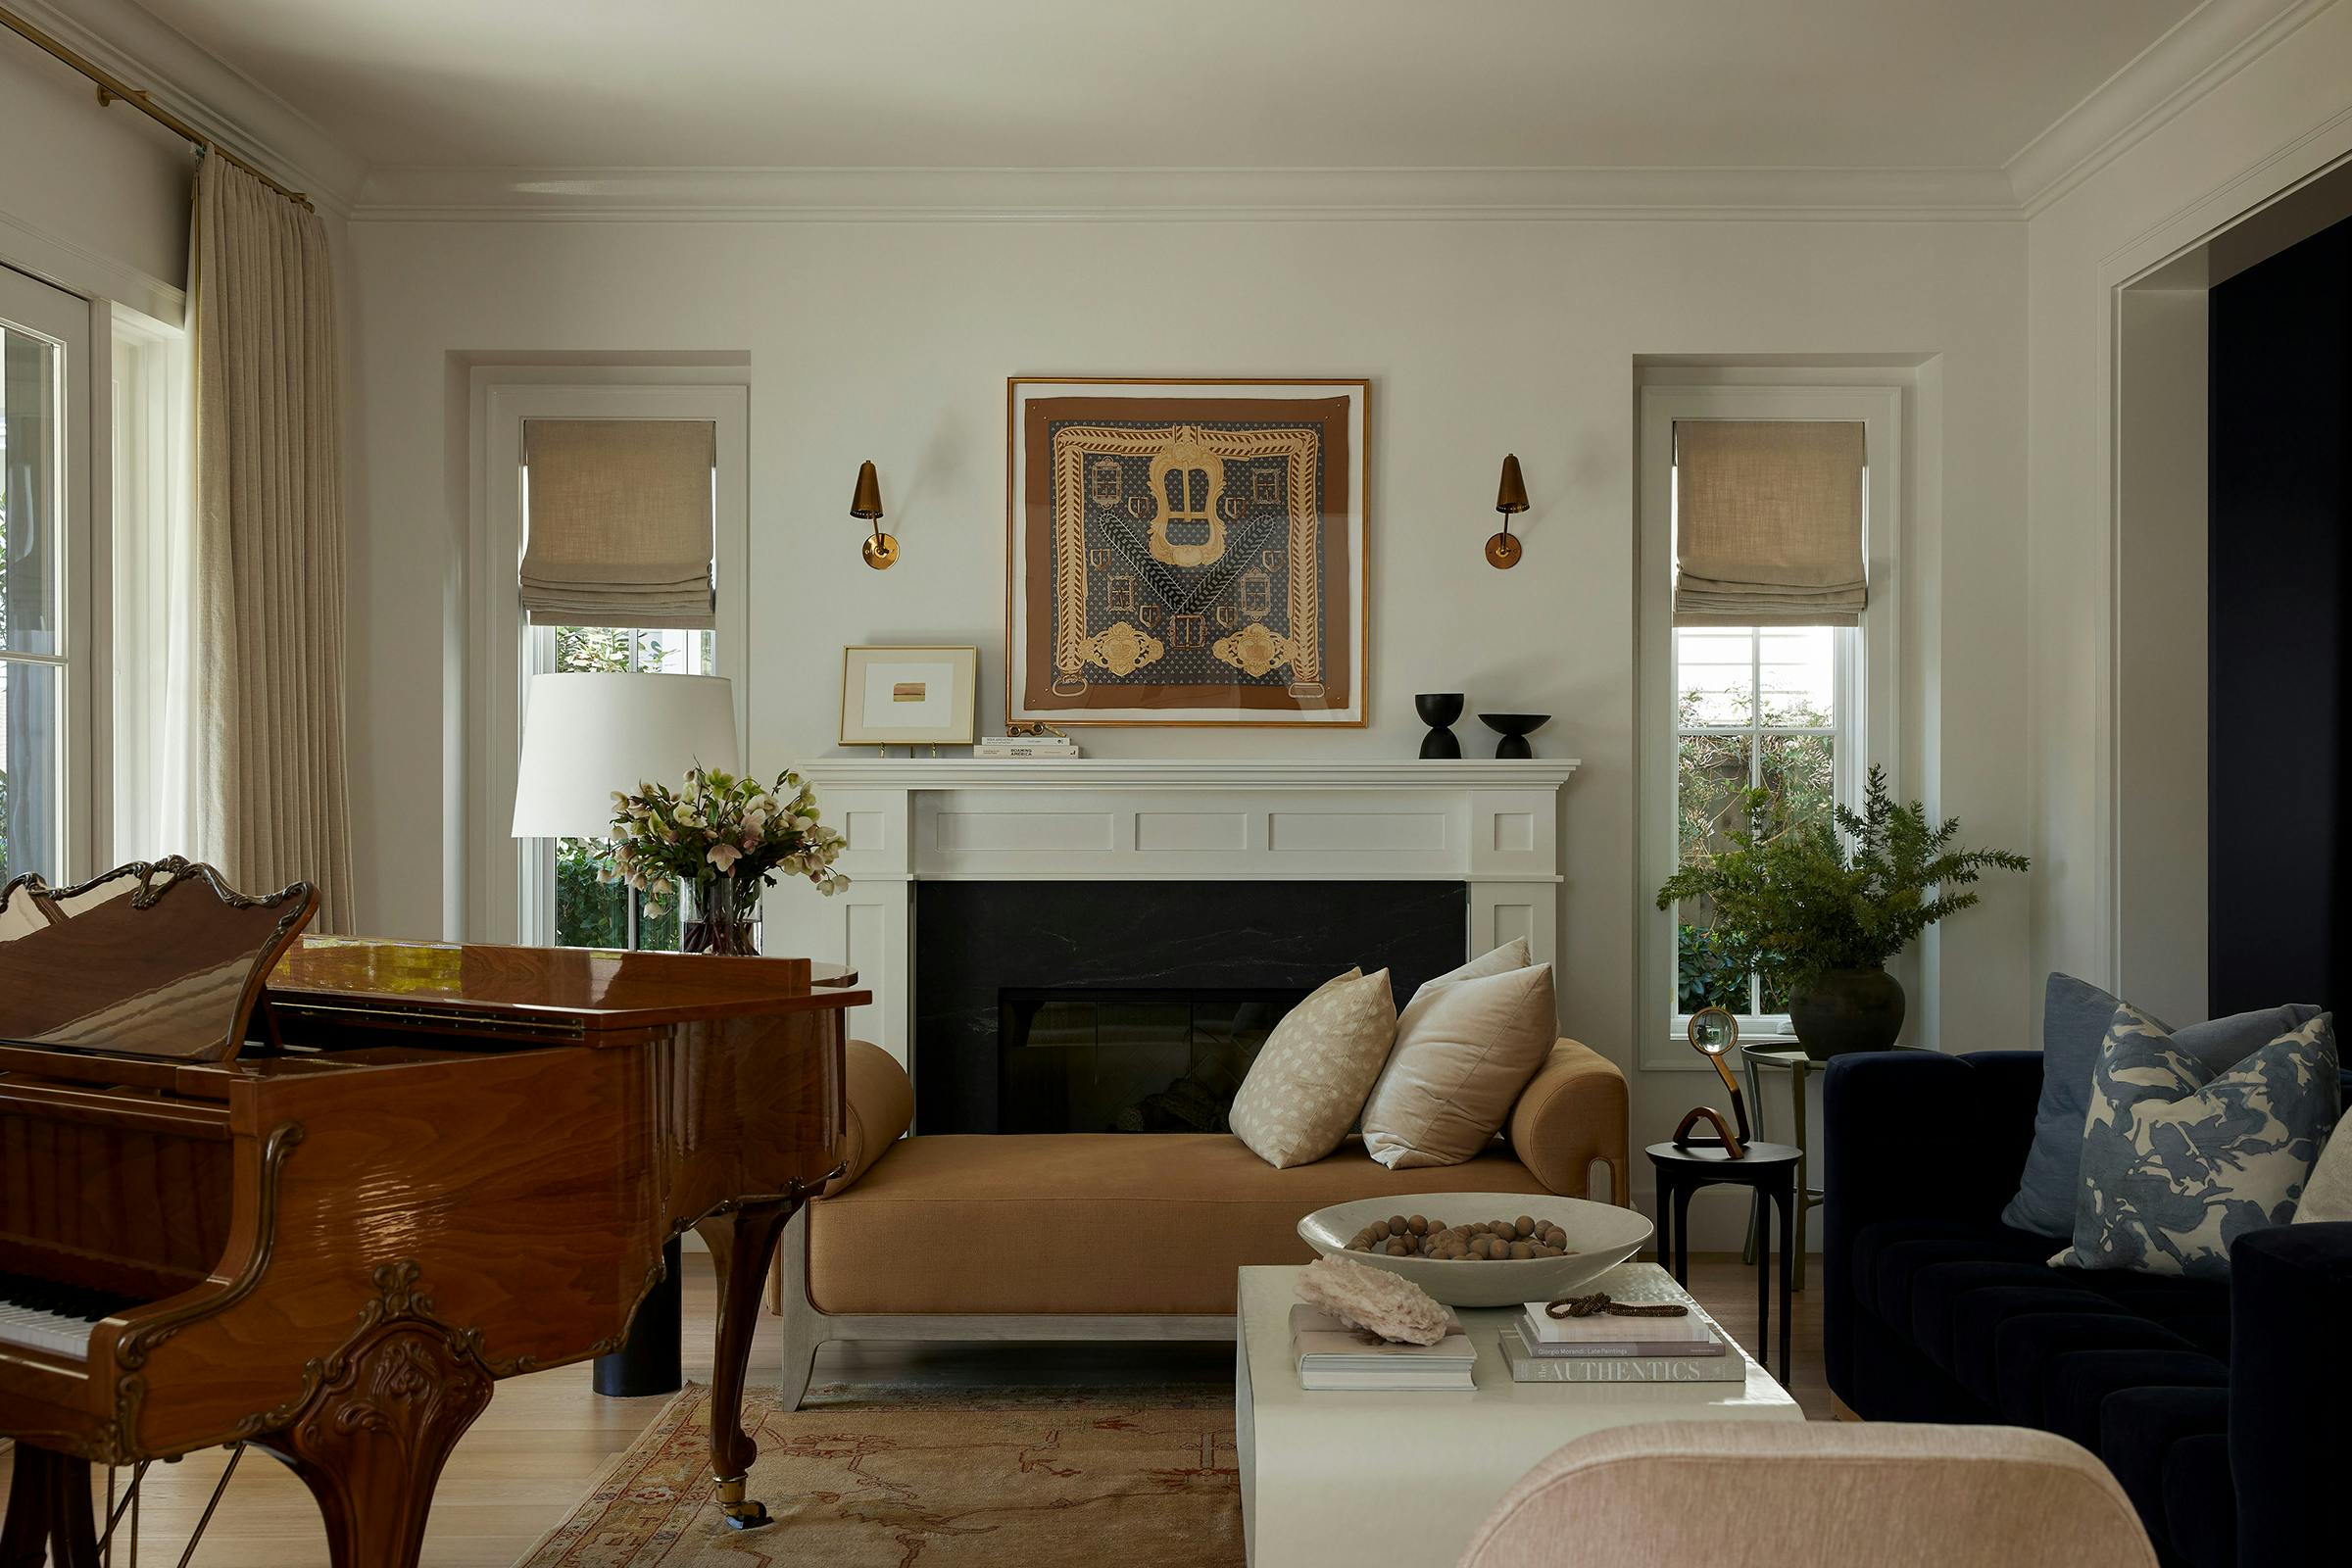 Nicole-Green-Design-Project-Coastal-Colonial-Sitting-Room-Fireplace